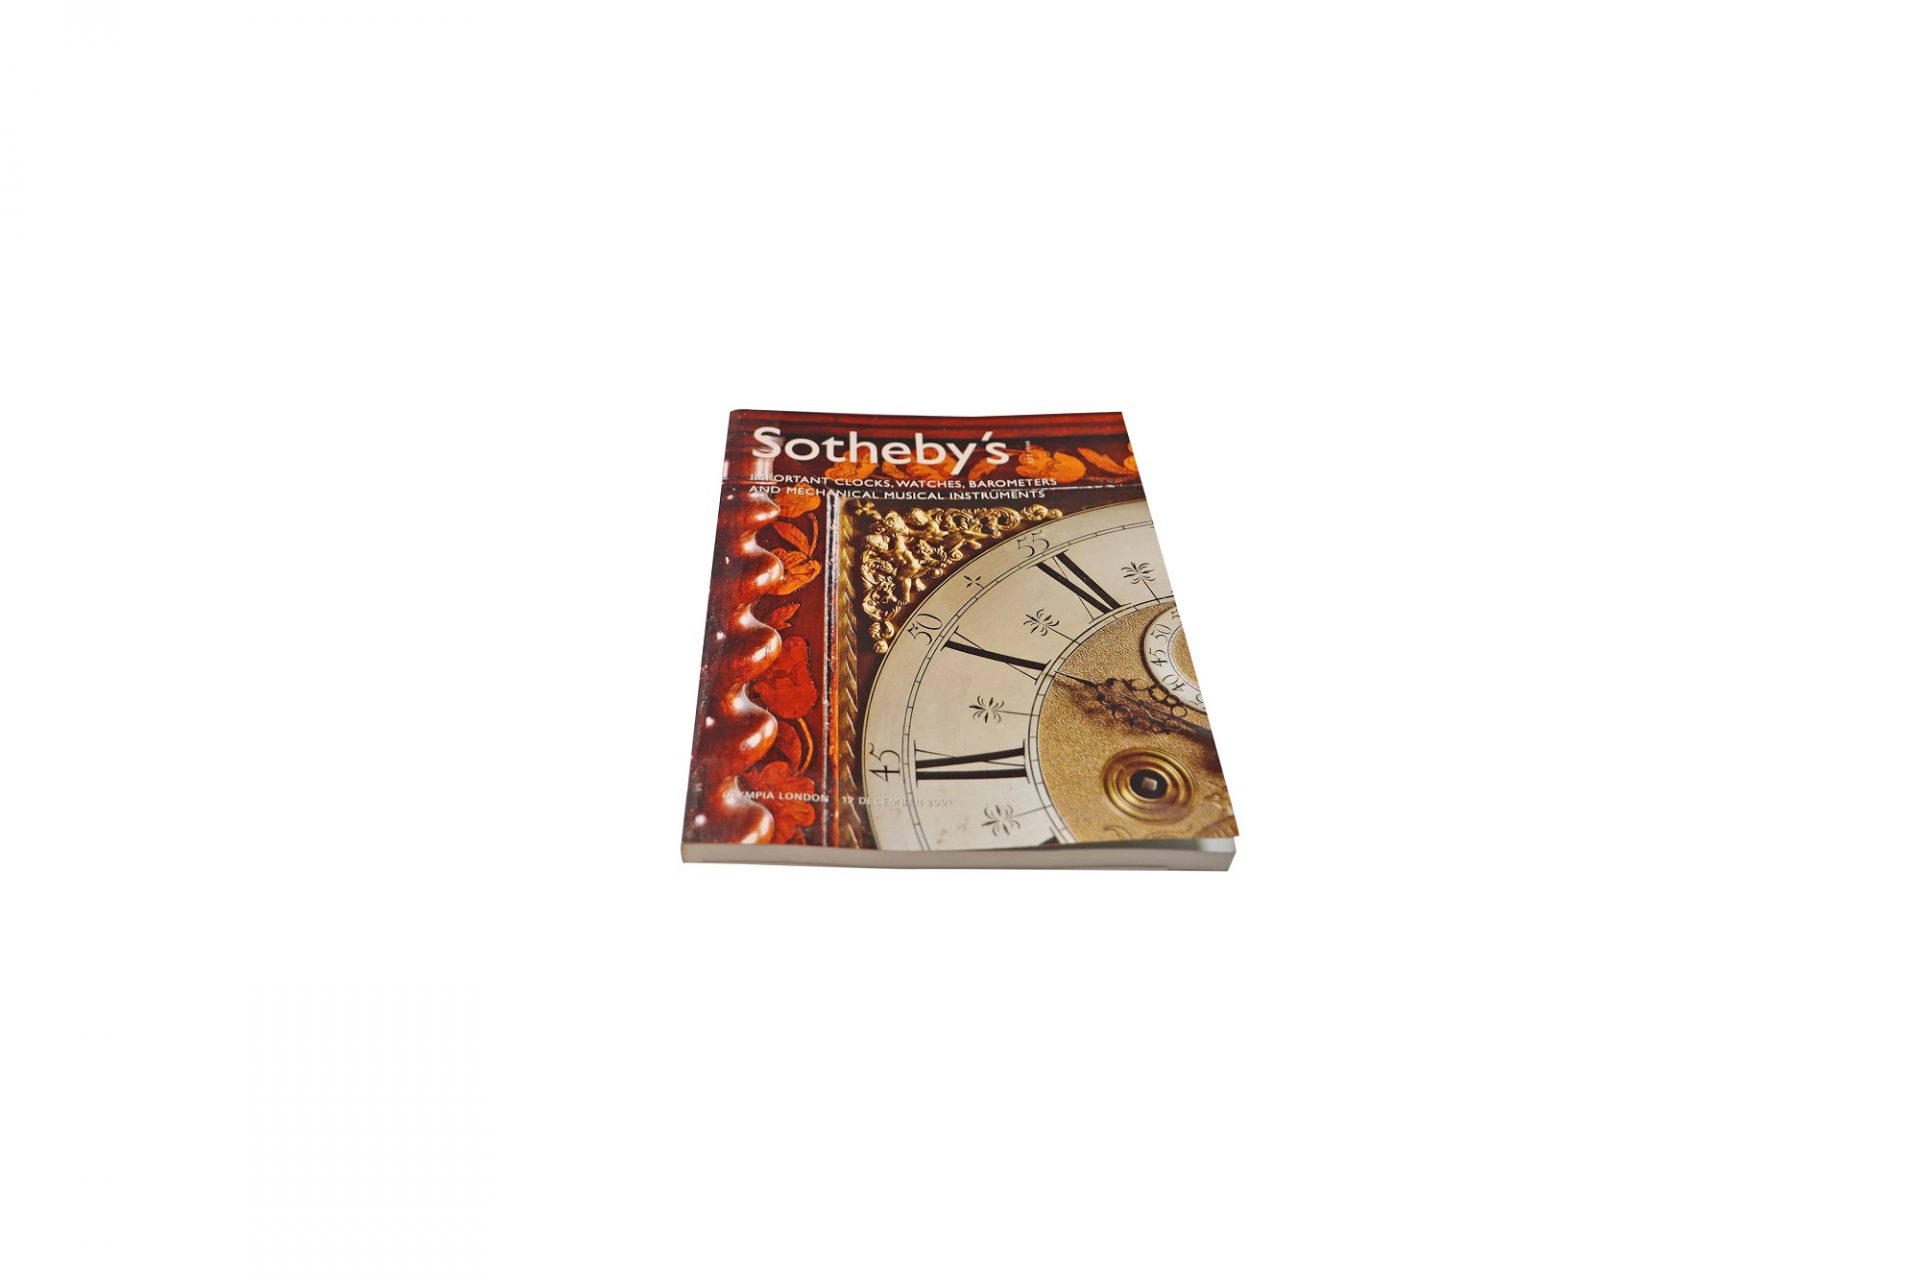 Sotheby's Important Clocks, Watches, Barometers And Mechanical Musical Instruments Landon December 19, 2001 Auction Catalog - Rare Watch Parts